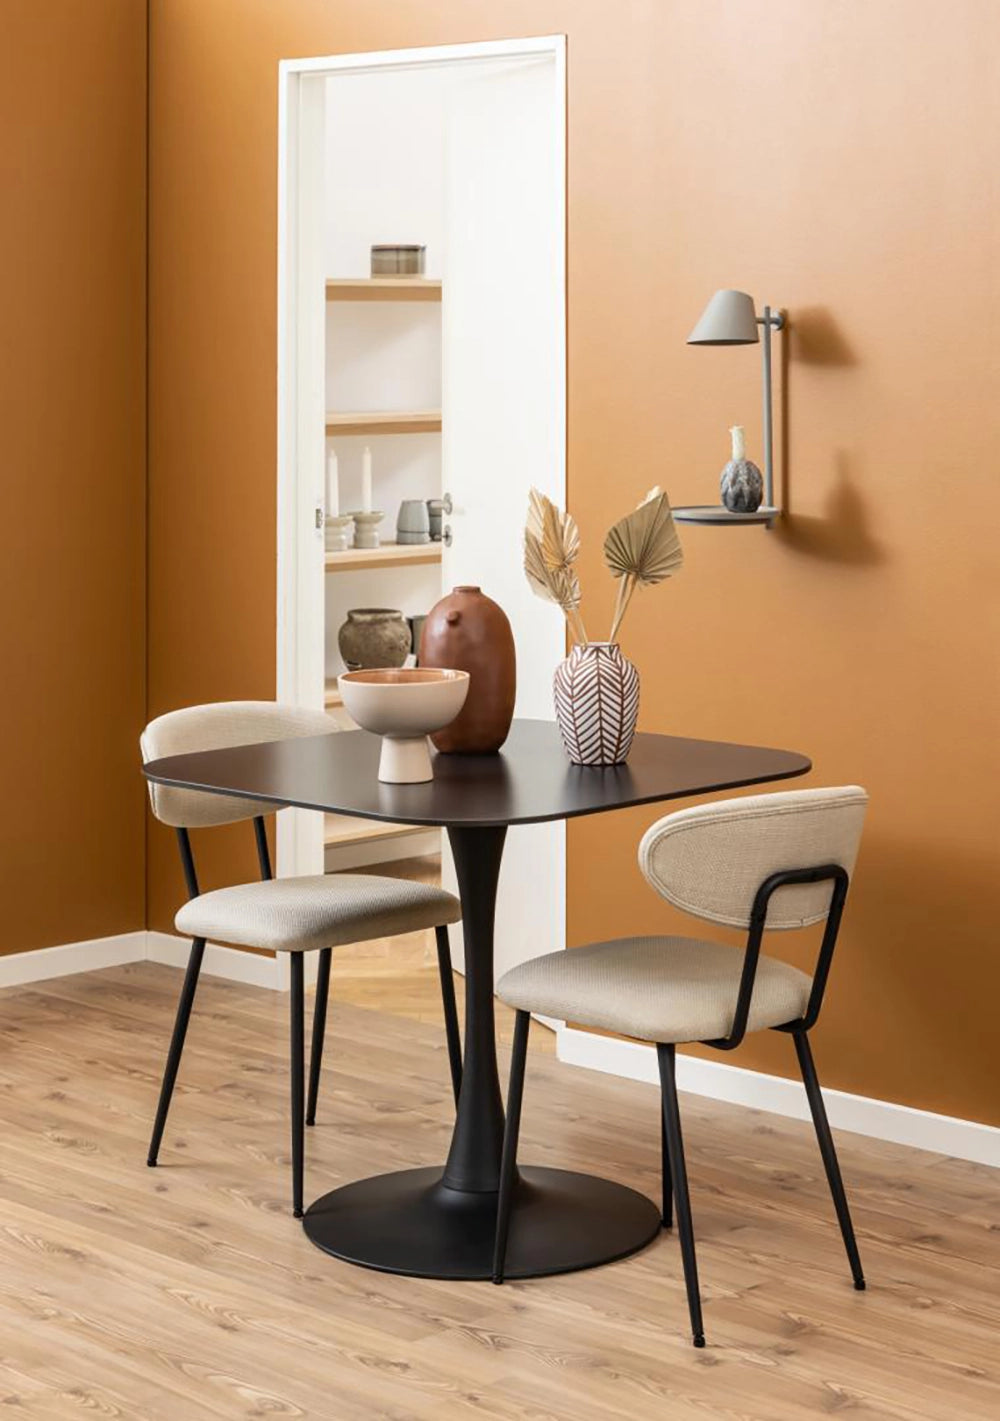 Dune Square Dining Table in Black Finish with White Chair and Wall Lampshade in Breakout Setting